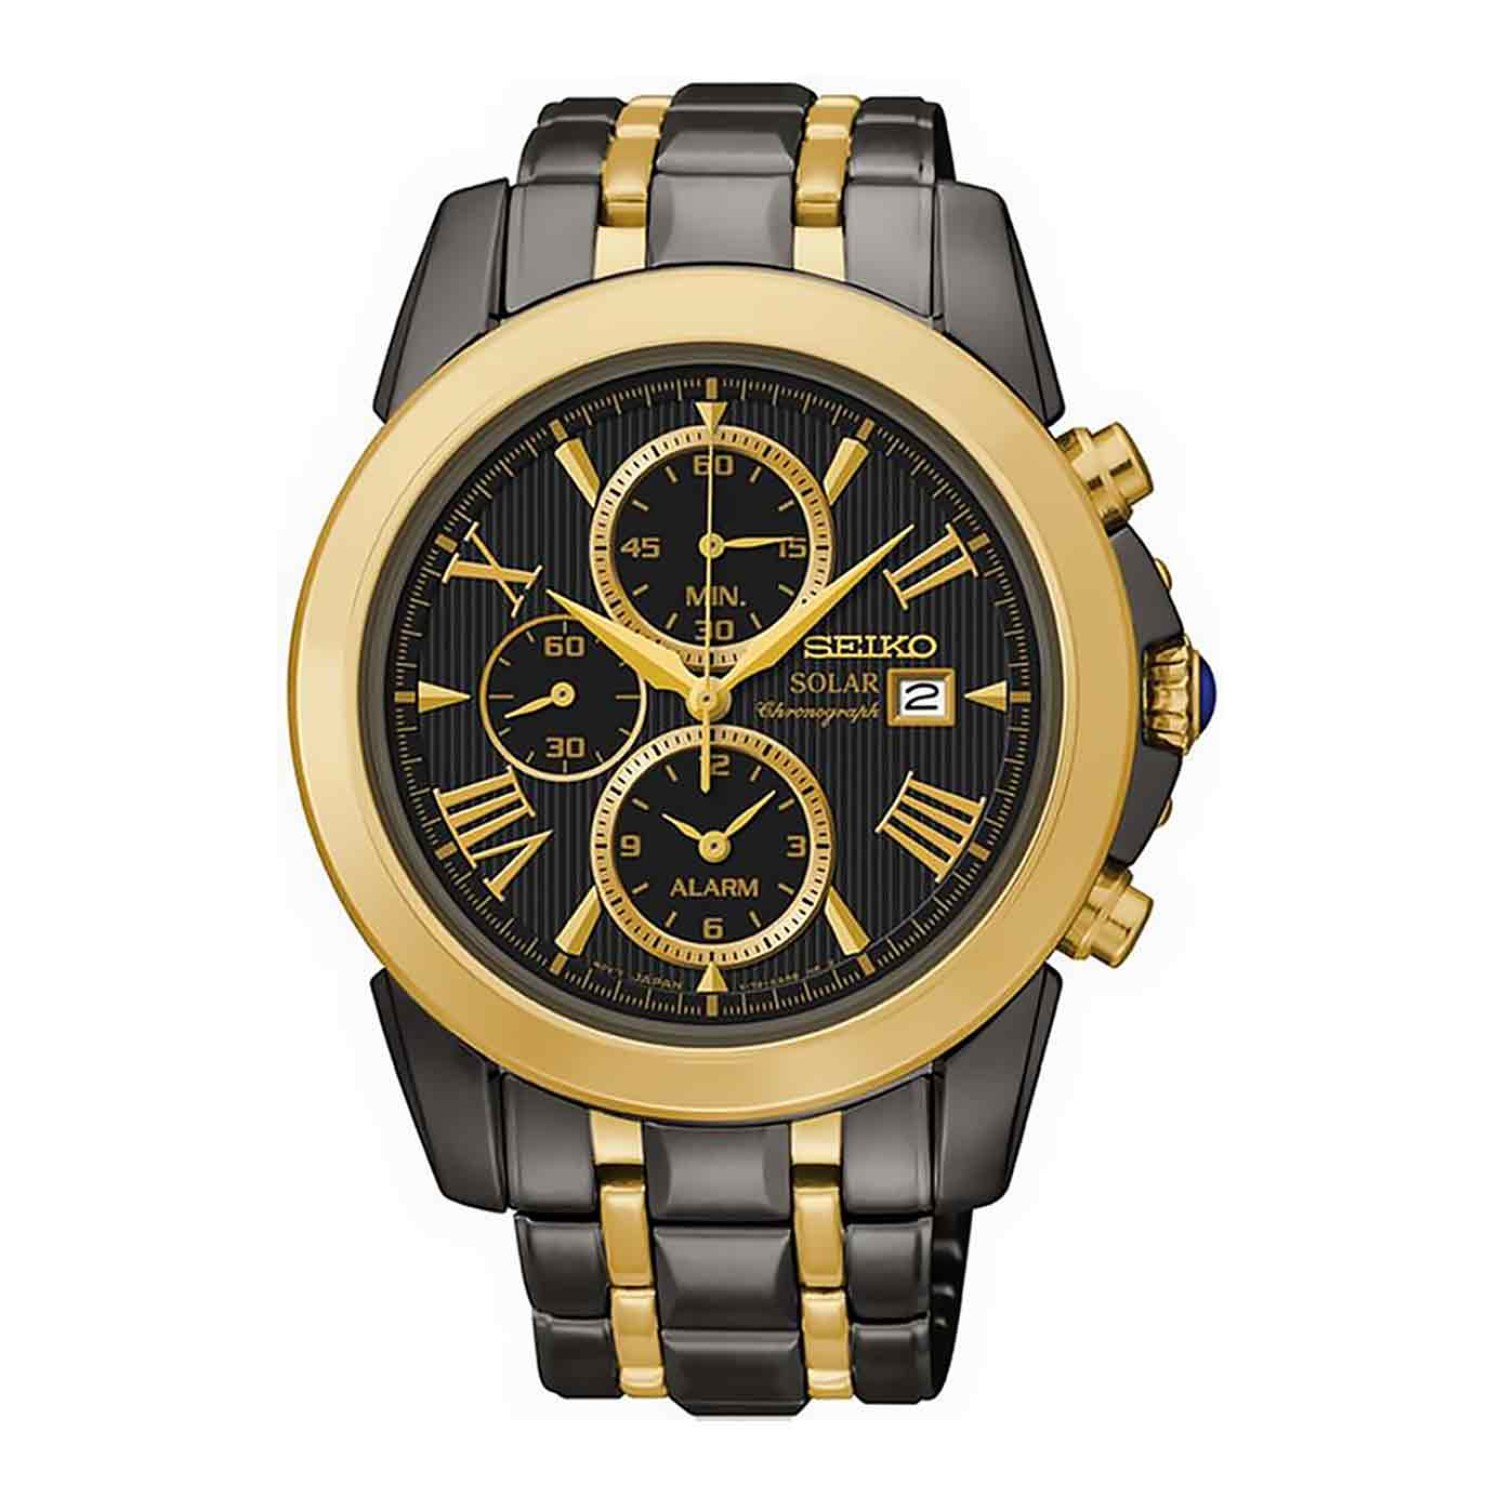 SSC218P  SEIKO Le Grand Sport Gold Solar Chronograph Watch. Available online or  at your Seiko Watch Specialist  - Christies Papatoetoe and Watch Station Manukau.3 Months No Payments and Interest for Q Card holders LAYBUY - Pay it easy, in 6 weekly paymen